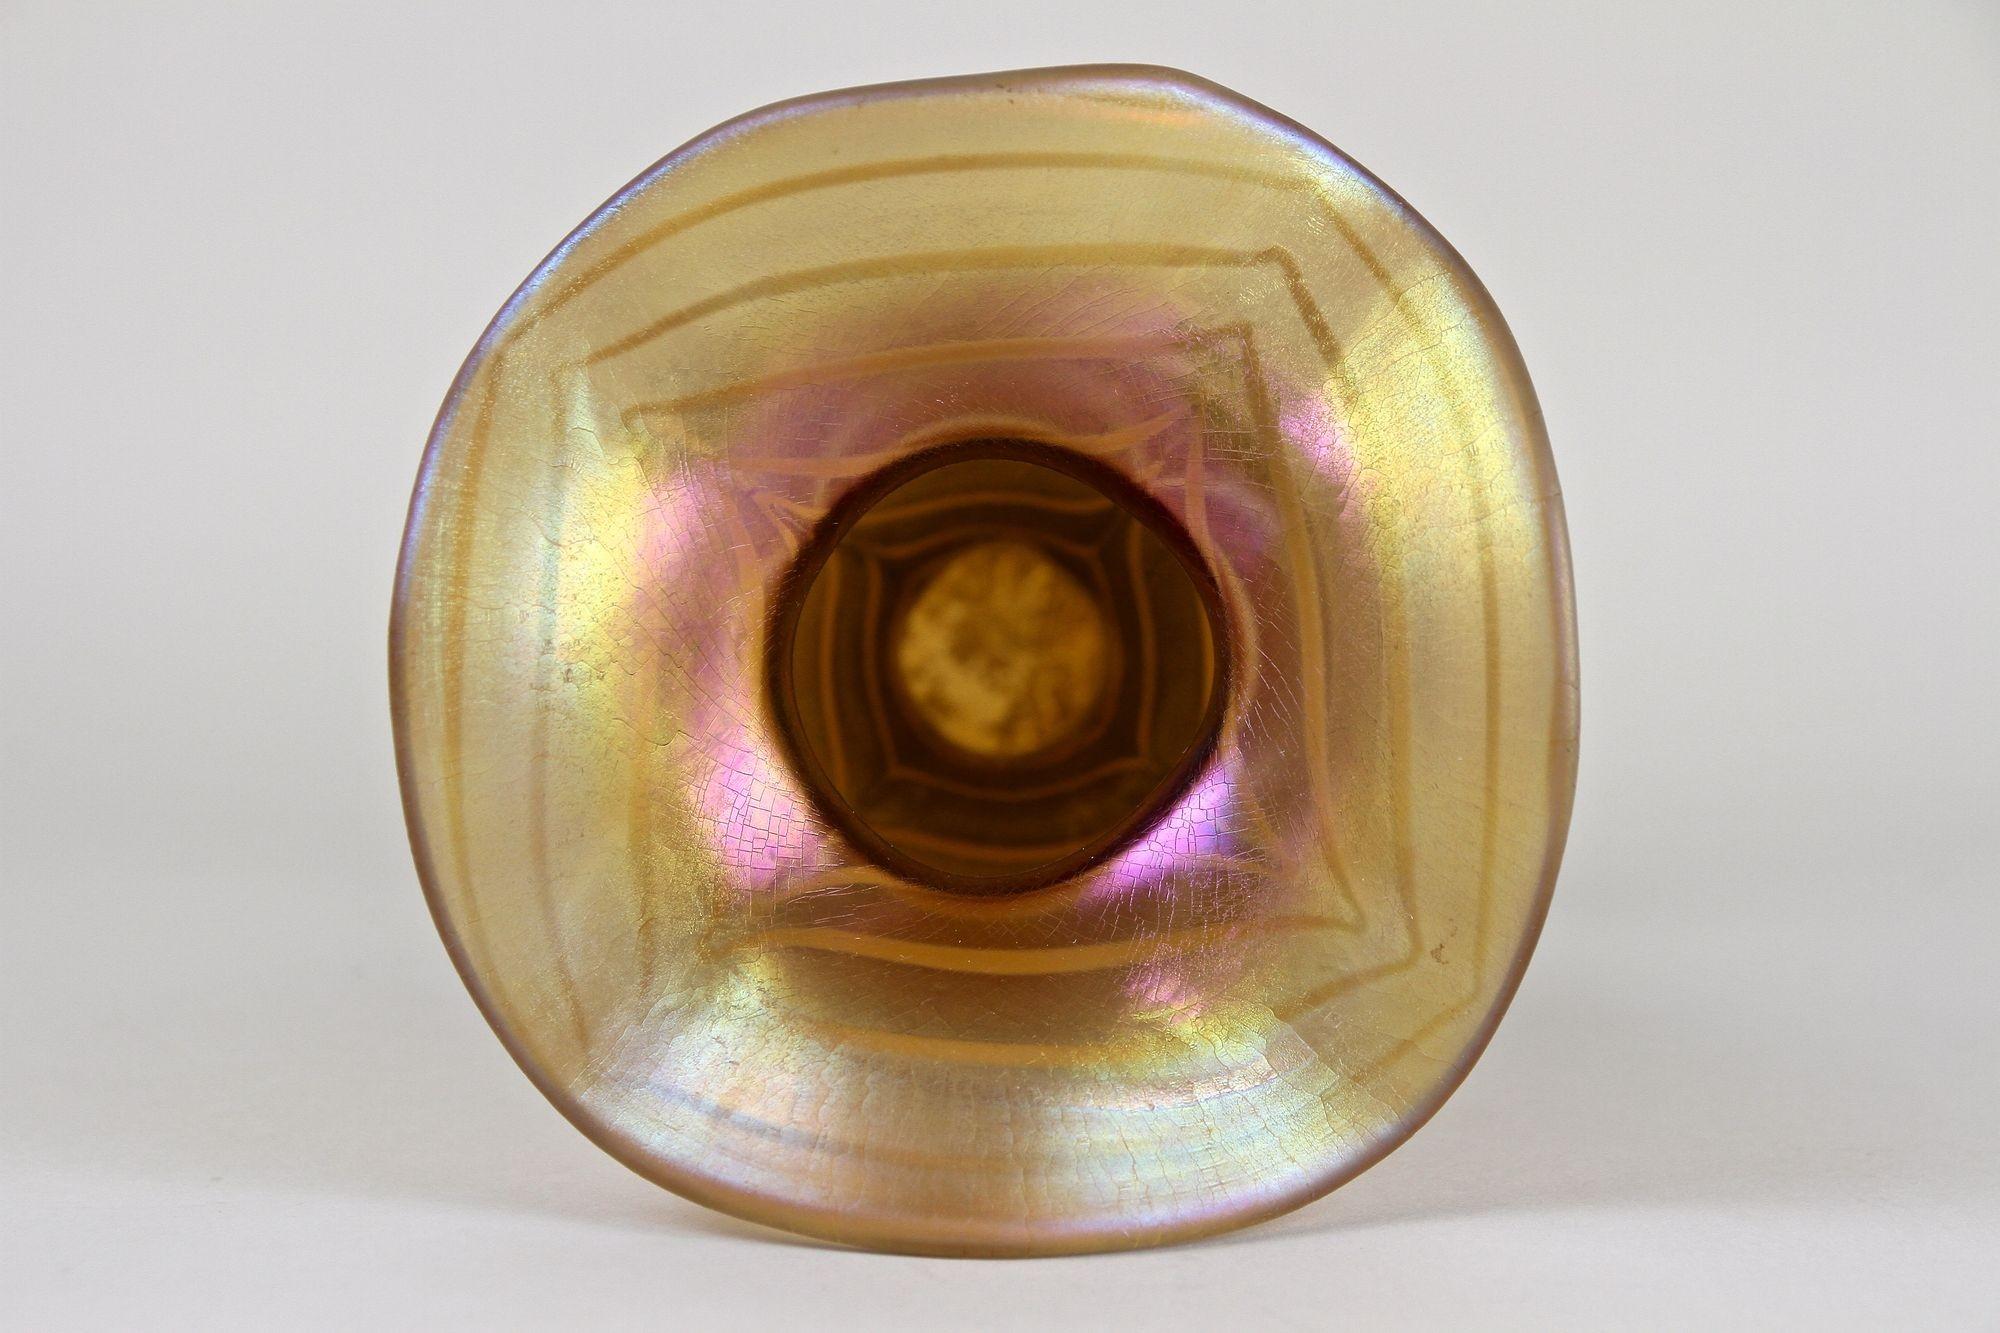 Art Nouveau Iridescent Glass Vase Attributed To Loetz Witwe, Bohemia, ca. 1915 For Sale 7